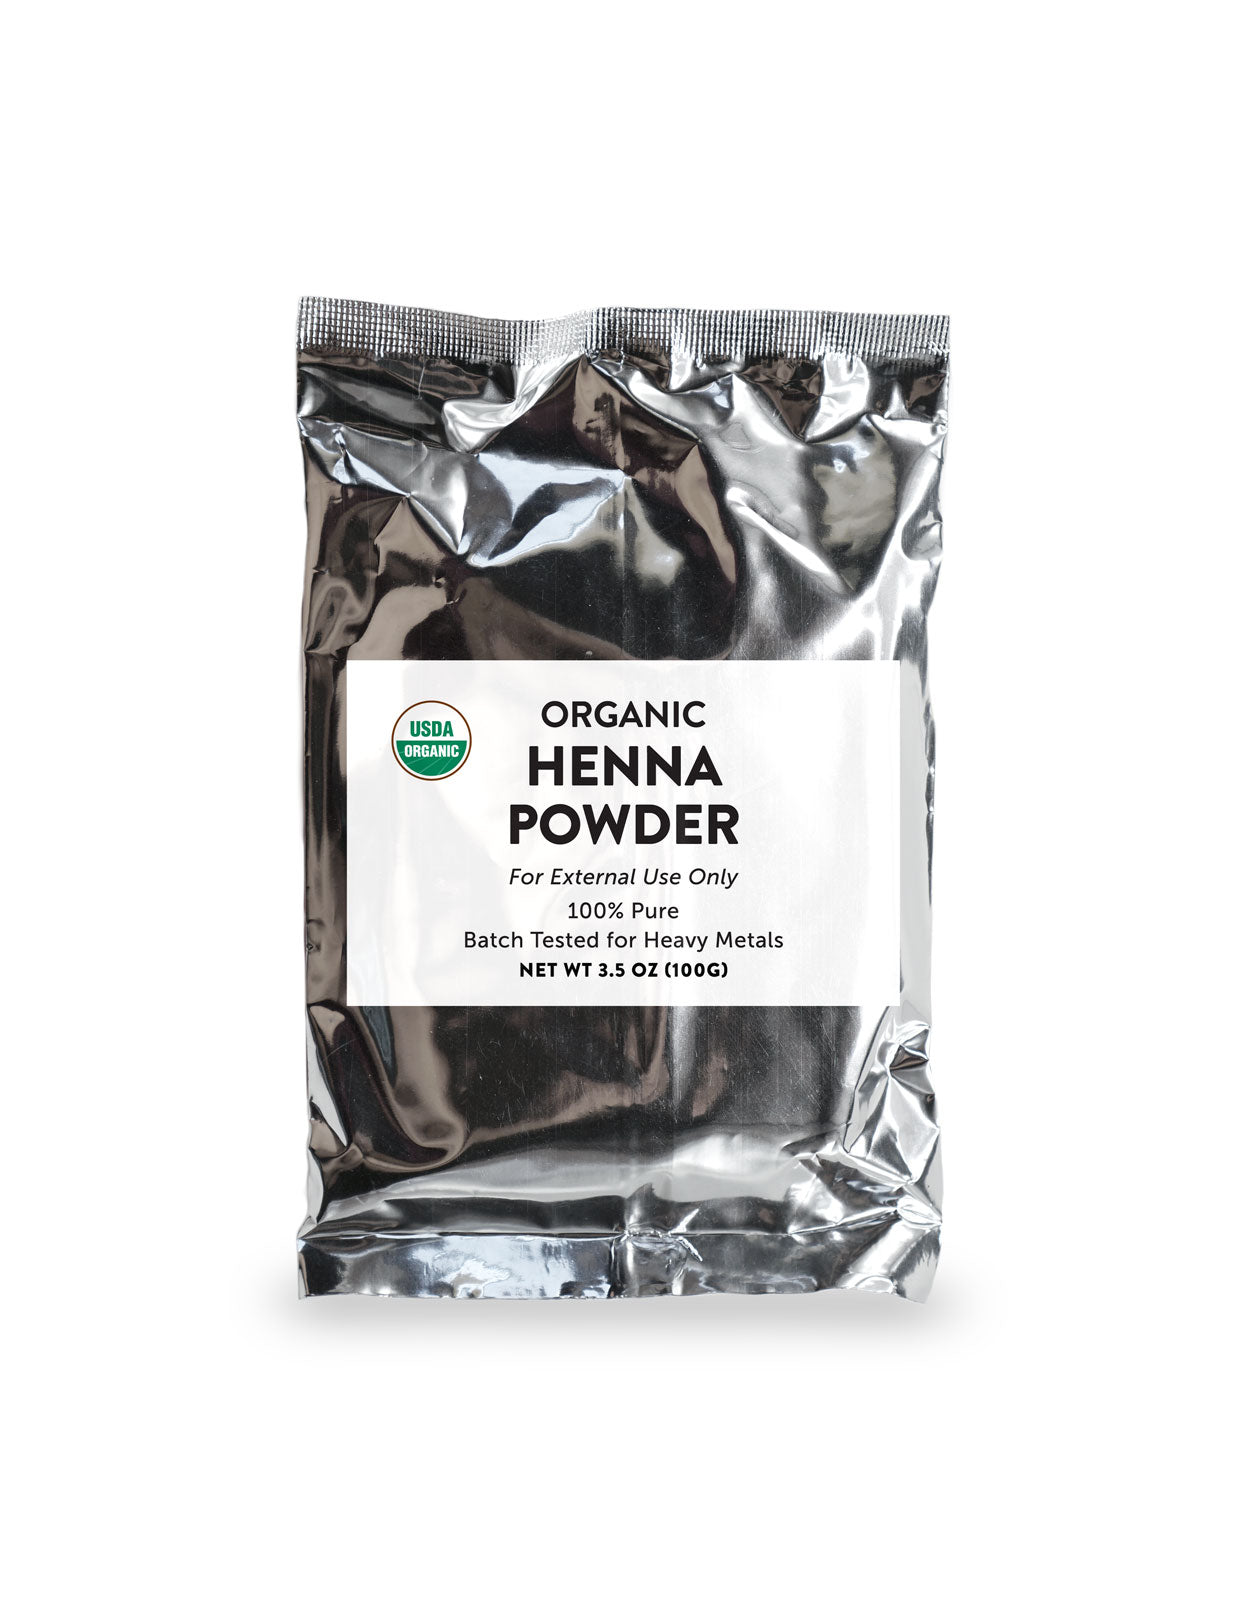 Package of Pure Indian Foods Organic Henna Powder for Hair & Skin